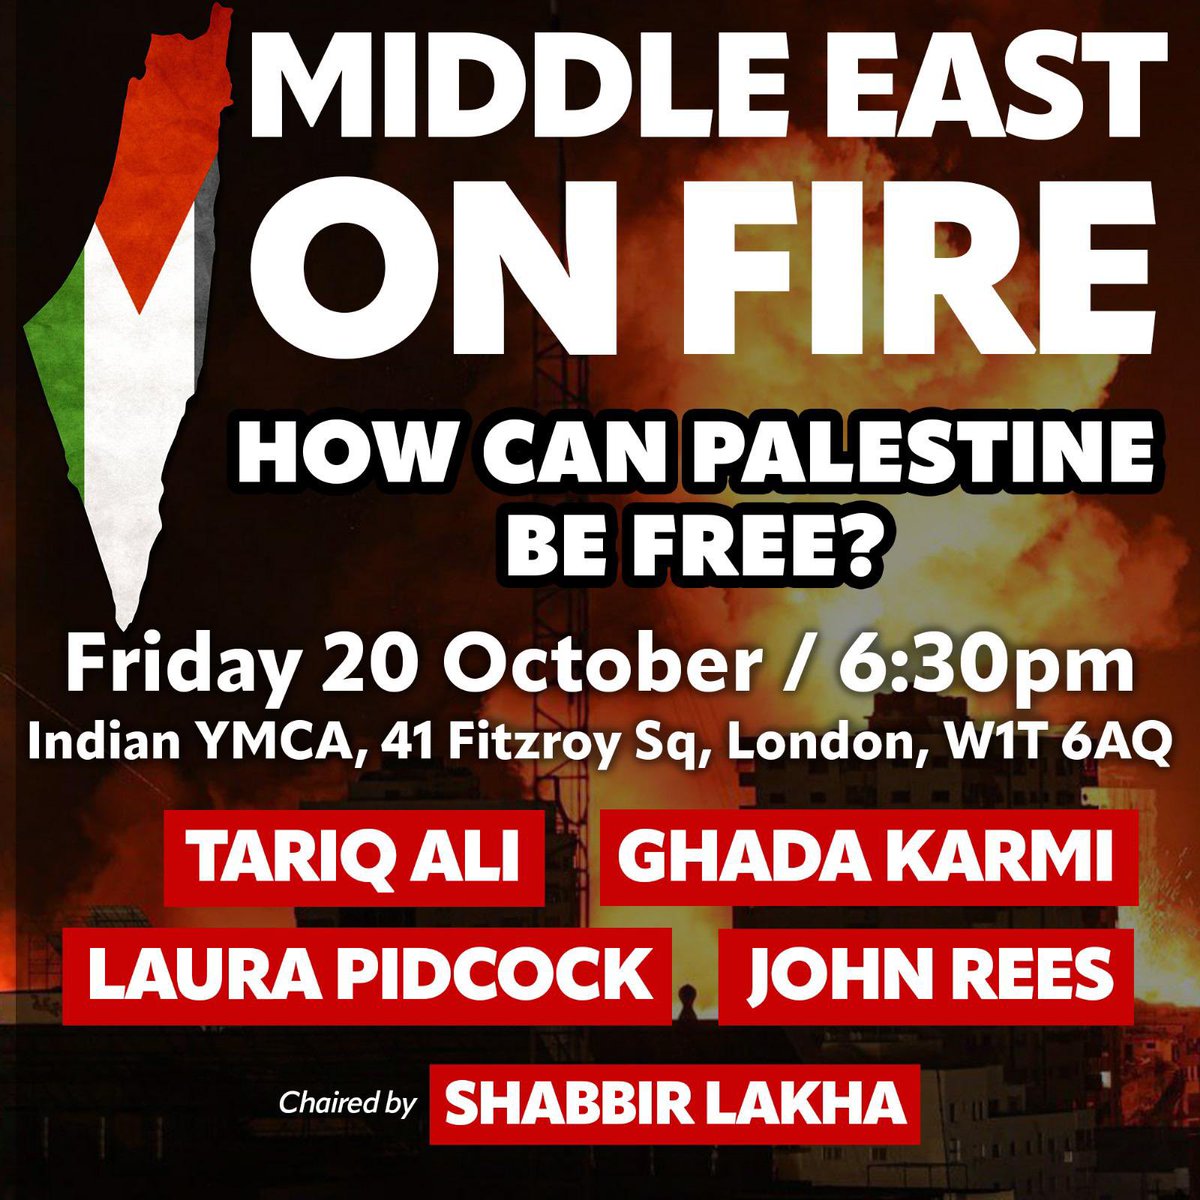 Tomorrow! Important meeting in London! With @TariqAli_News @ghadakarmi @LauraPidcock @JohnWRees @ShabbirLakha On the eve of a national demo for Palestine. To deepen our analysis and discuss a socialist strategy. Book here eventbrite.co.uk/e/middle-east-… #FreePalestine #Gazagenocide